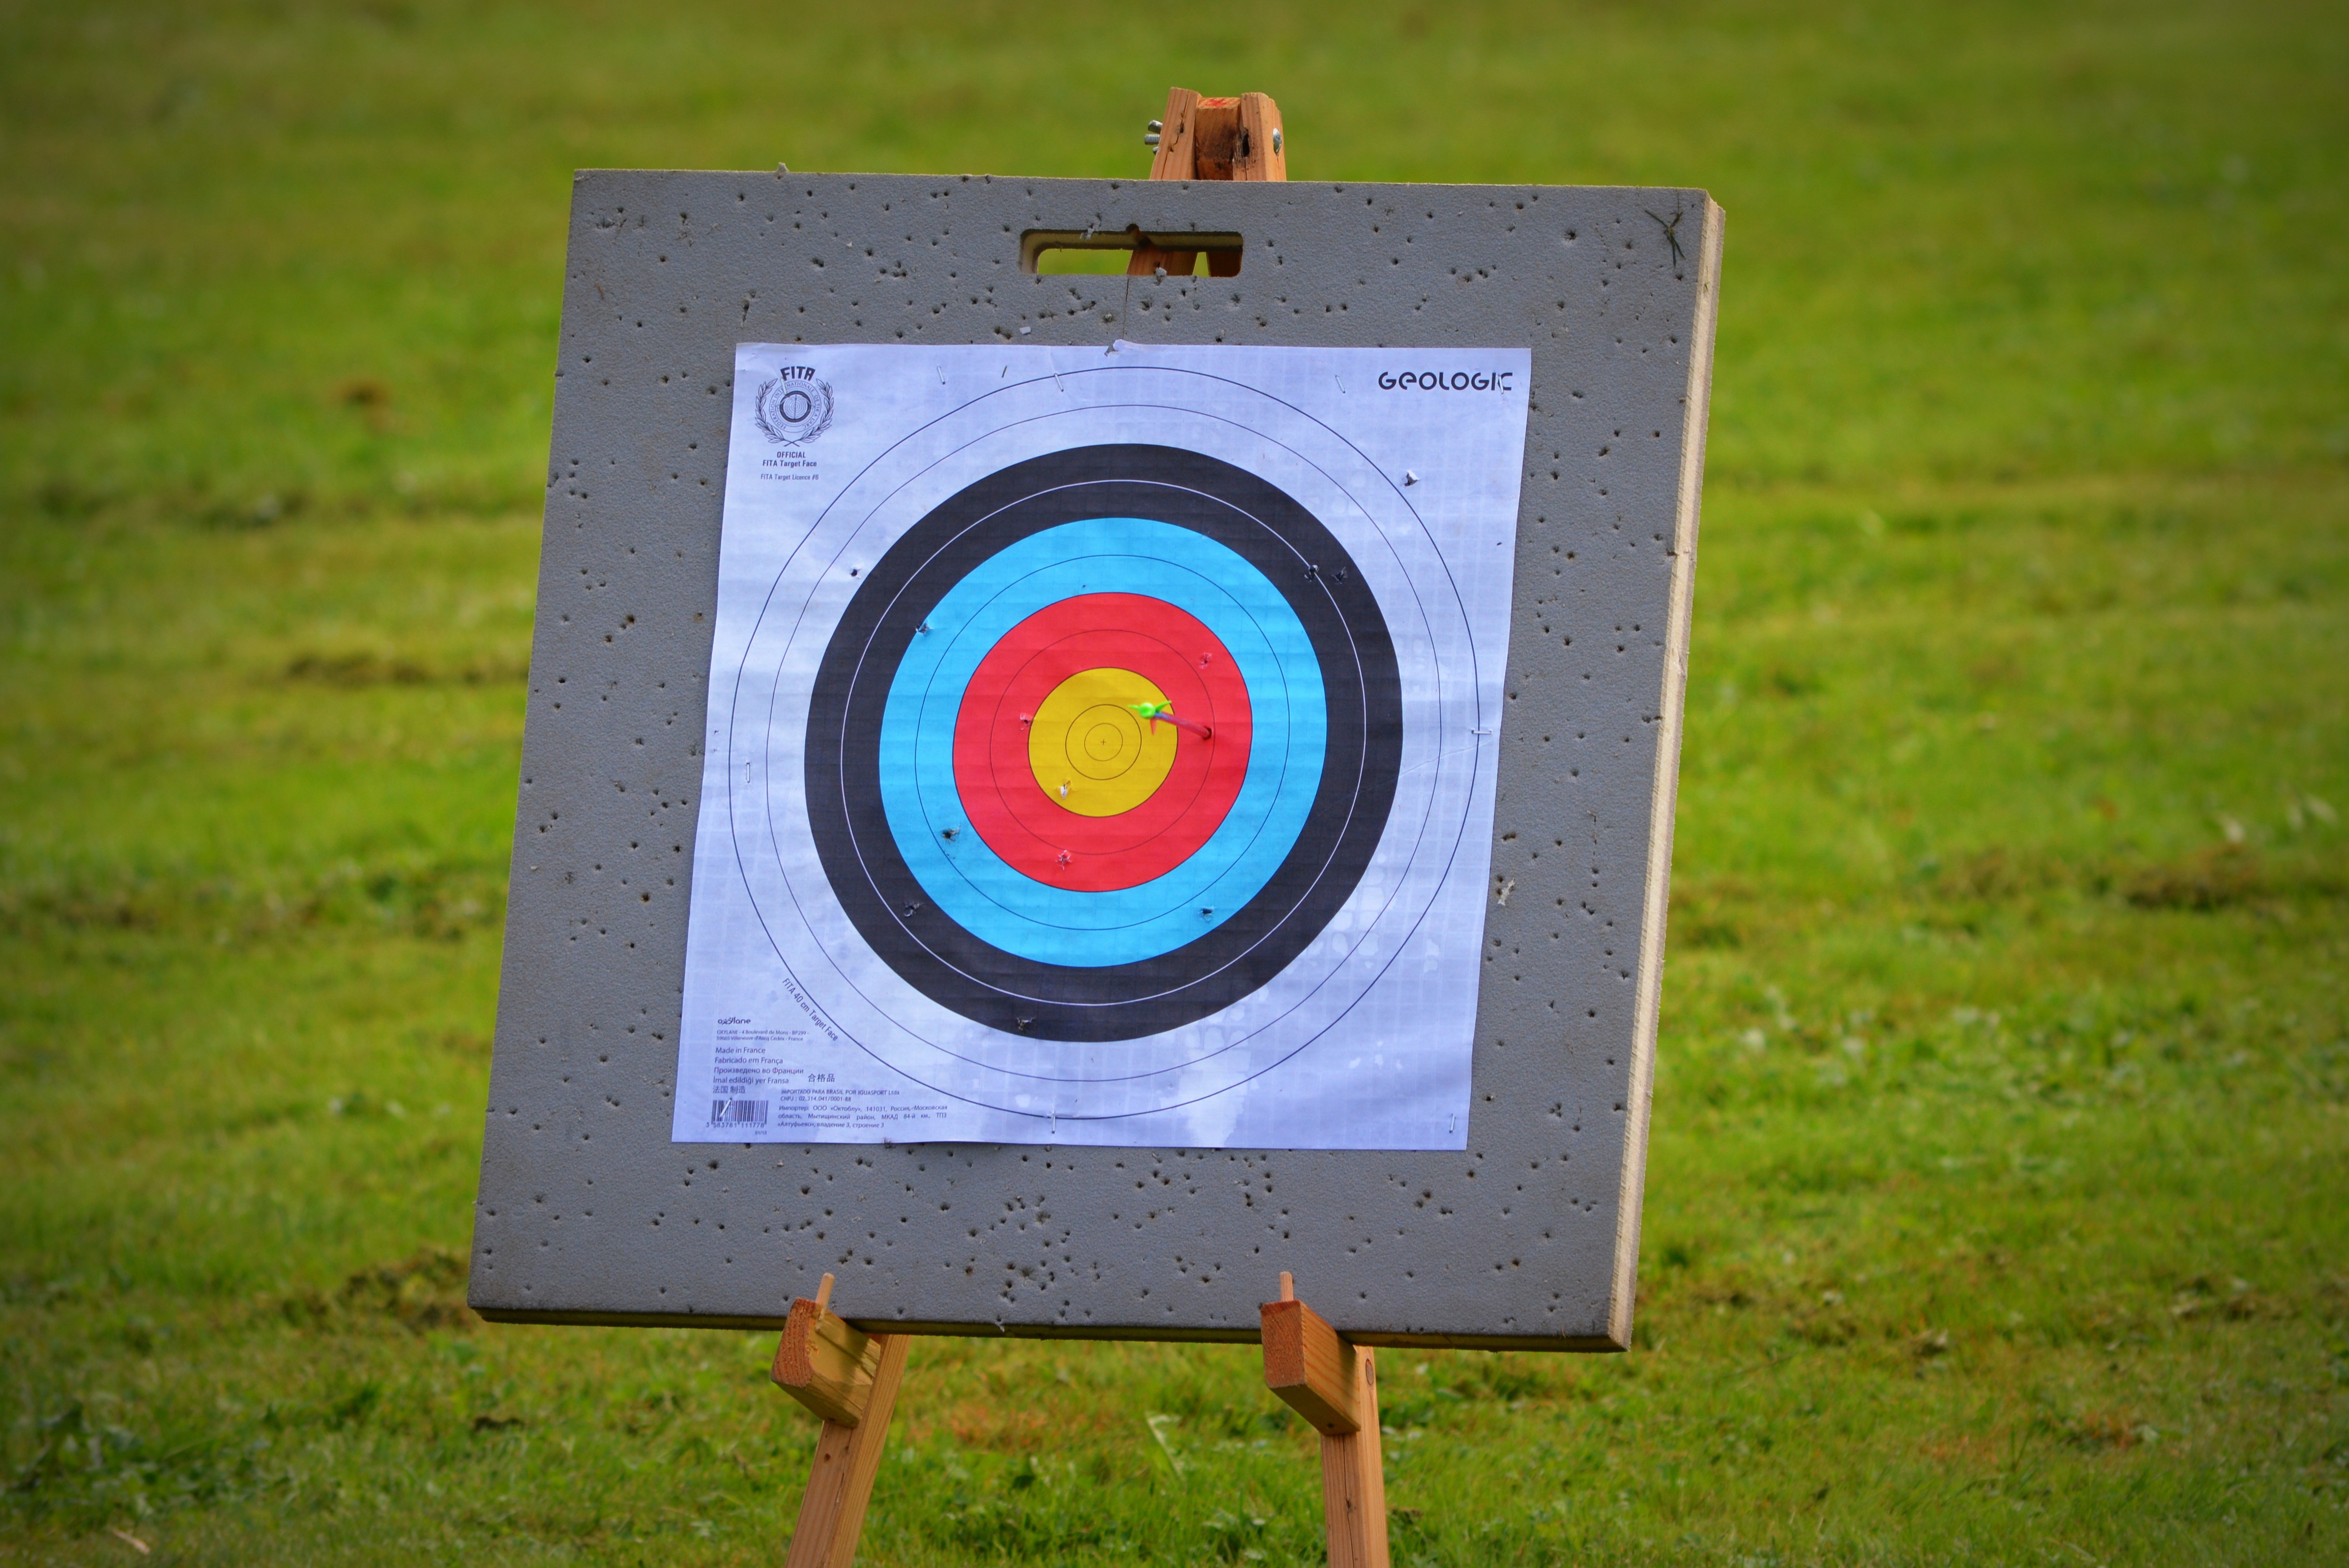 focus, sports, target, purpose, archery wallpaper for mobile